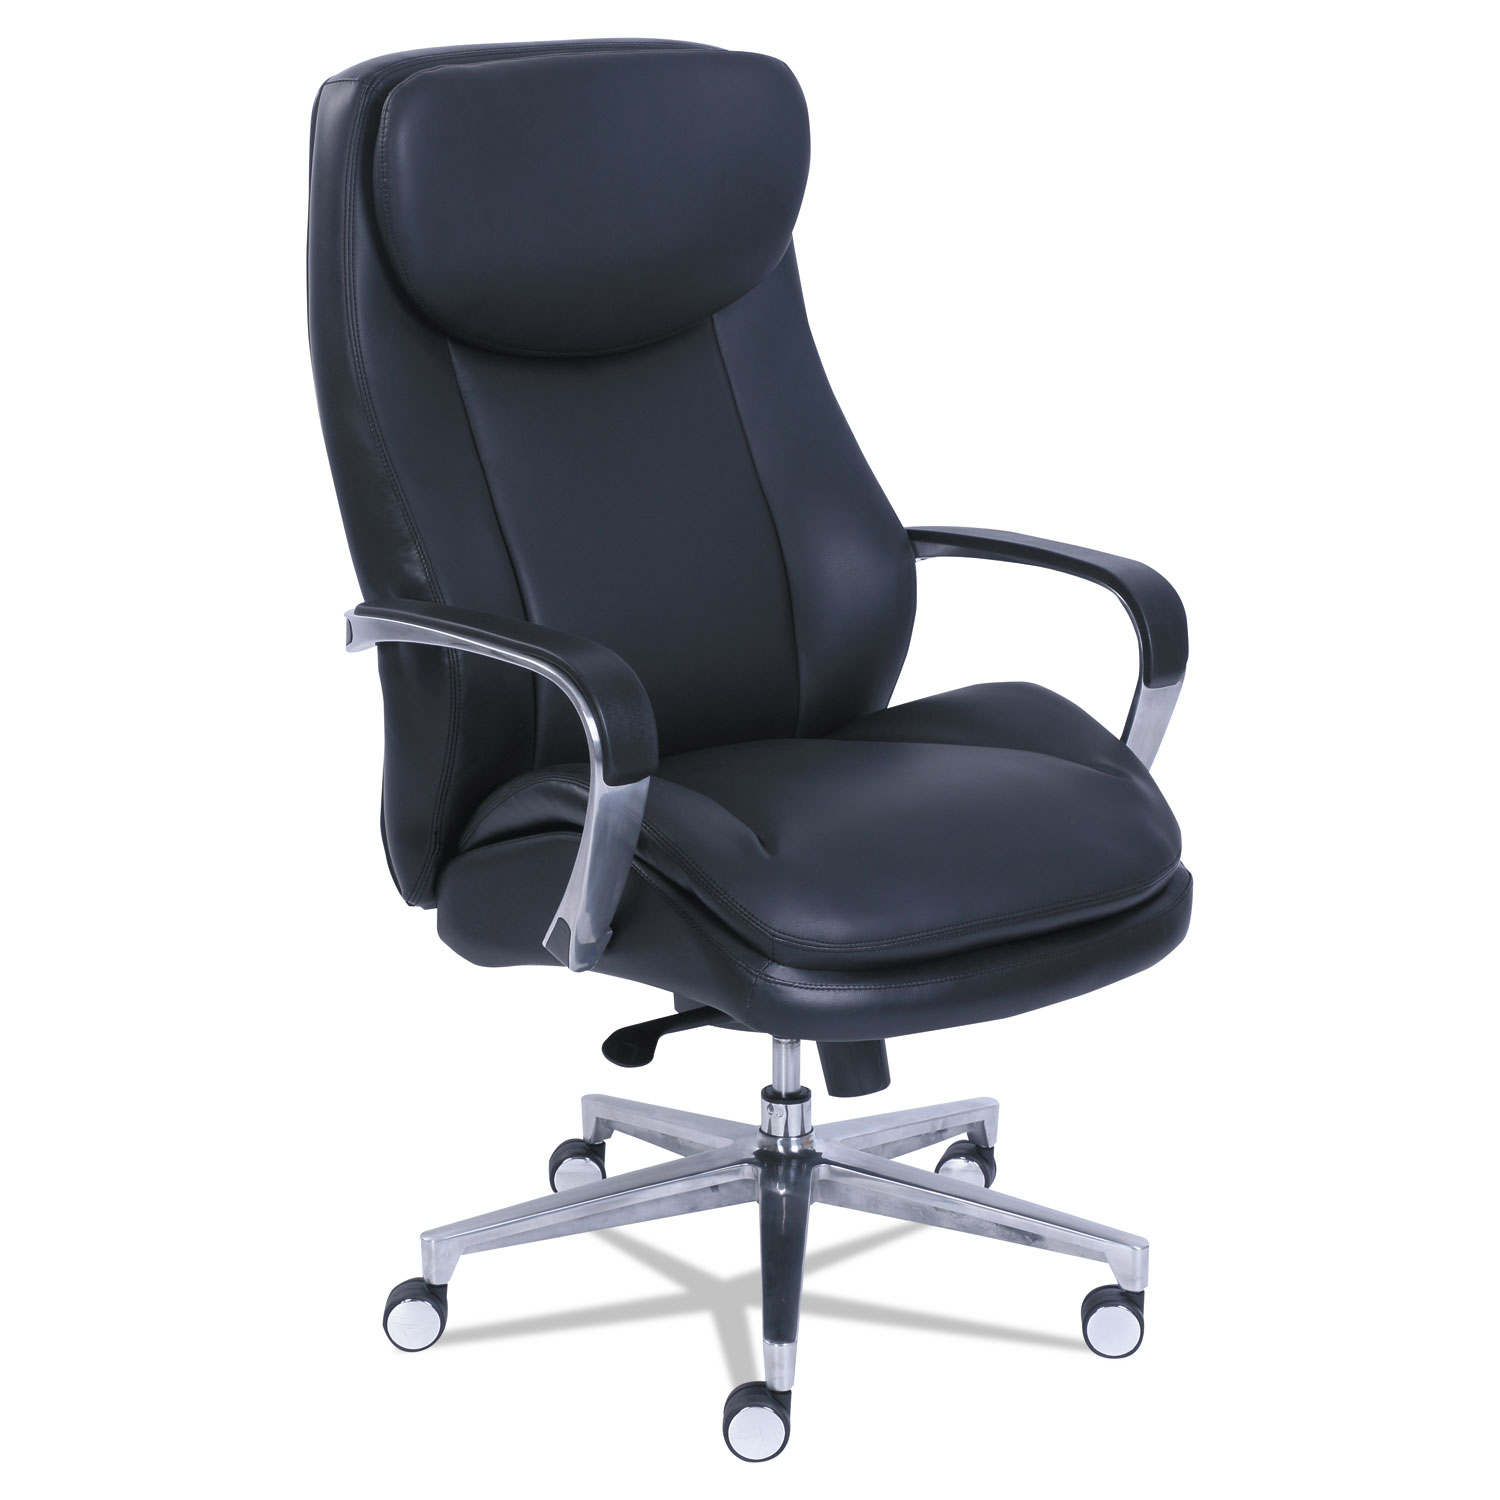  La-Z-Boy 48958 Commercial 2000 High-Back Executive Chair, Supports up to 300 lbs., Black Seat/Black Back, Silver Base (LZB48958) 